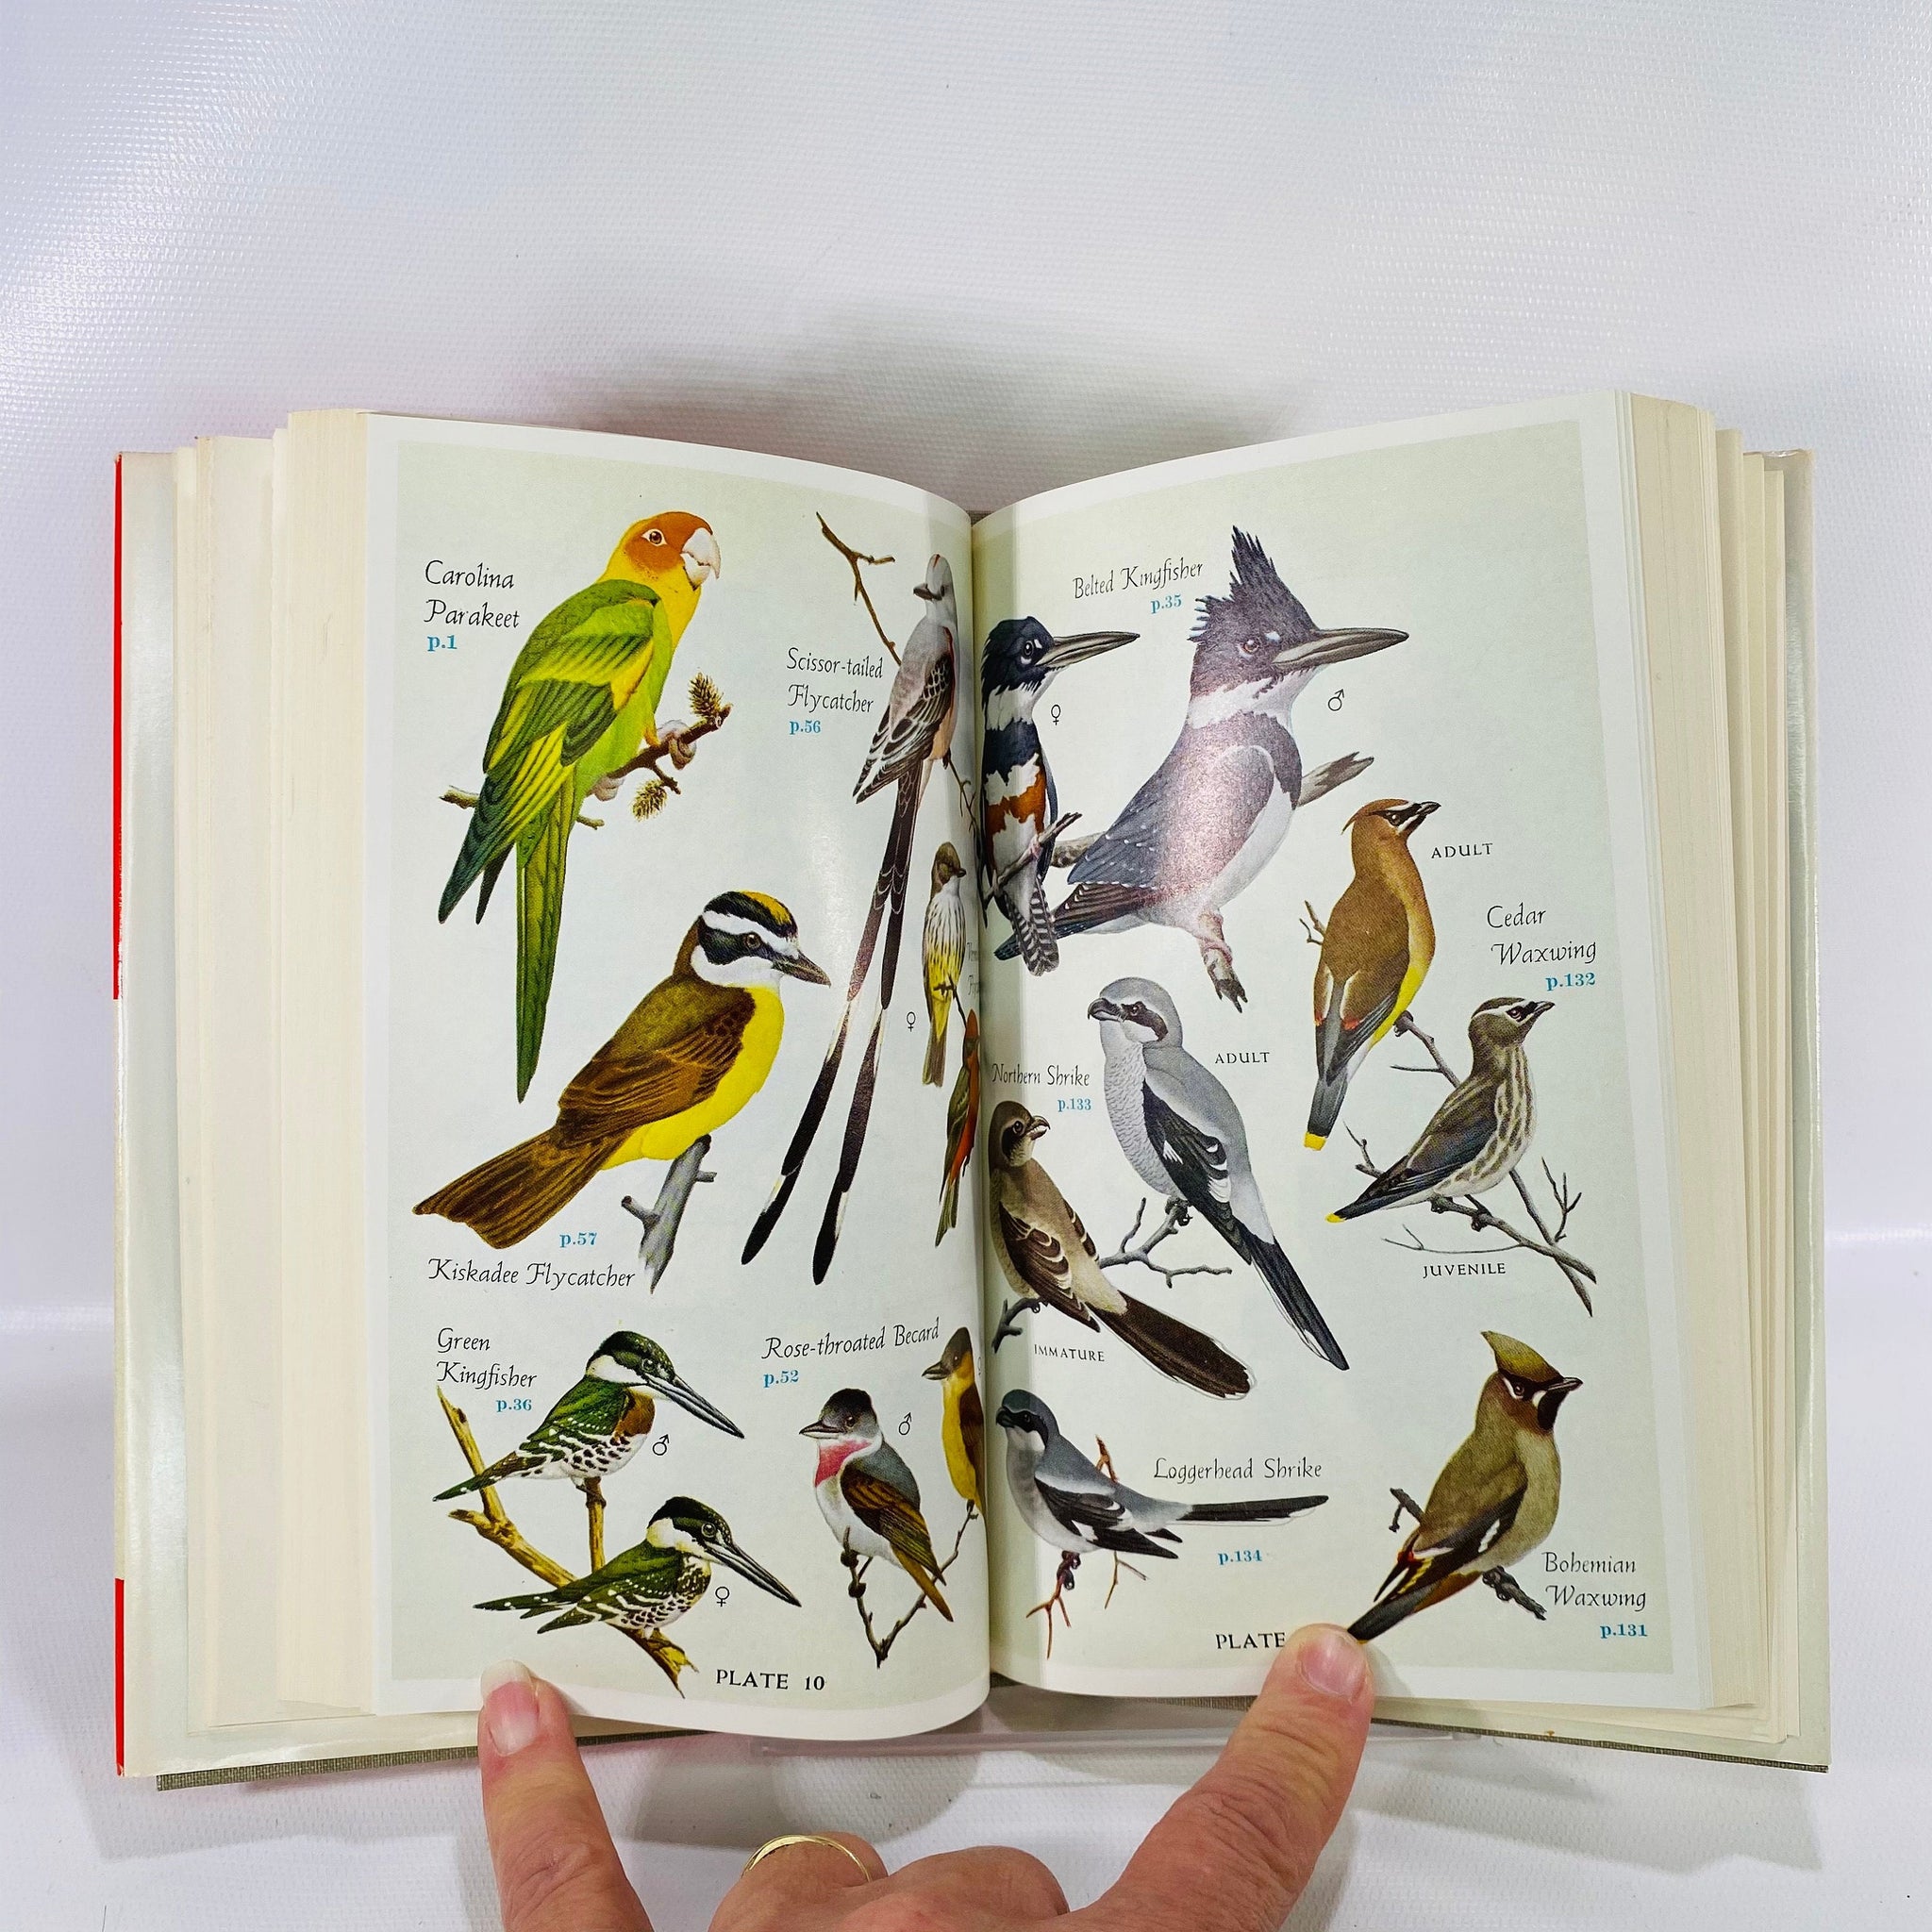 Audubon Land Bird Guide Birds of Eastern & Central North America by Ri - Reading Vintage